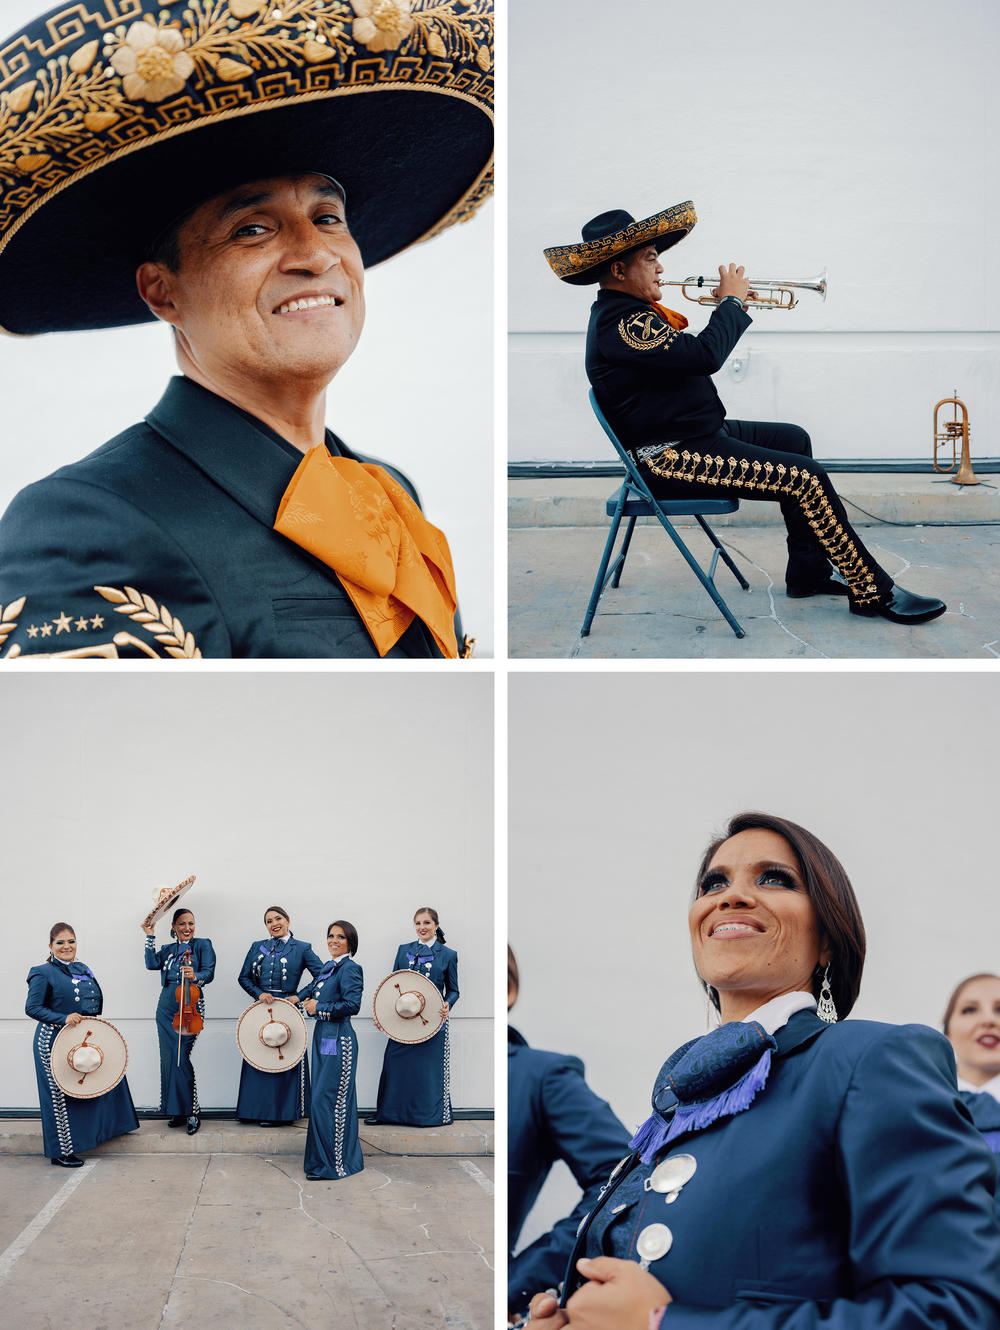 <strong>Top:</strong> Alejandro Uribe and Edson Andres of Mariachi Estrella de México, which was founded in Guadalajara, Mexico, pose for photos at the Mariachi USA festival in June. <strong>Bottom:</strong> The Boyle Heights, Los Angeles-based Mariachi Lindas Mexicanas, founded by Maricela Martinez (far left), poses for a photo in June; member Silvia Estrada is pictured at right.